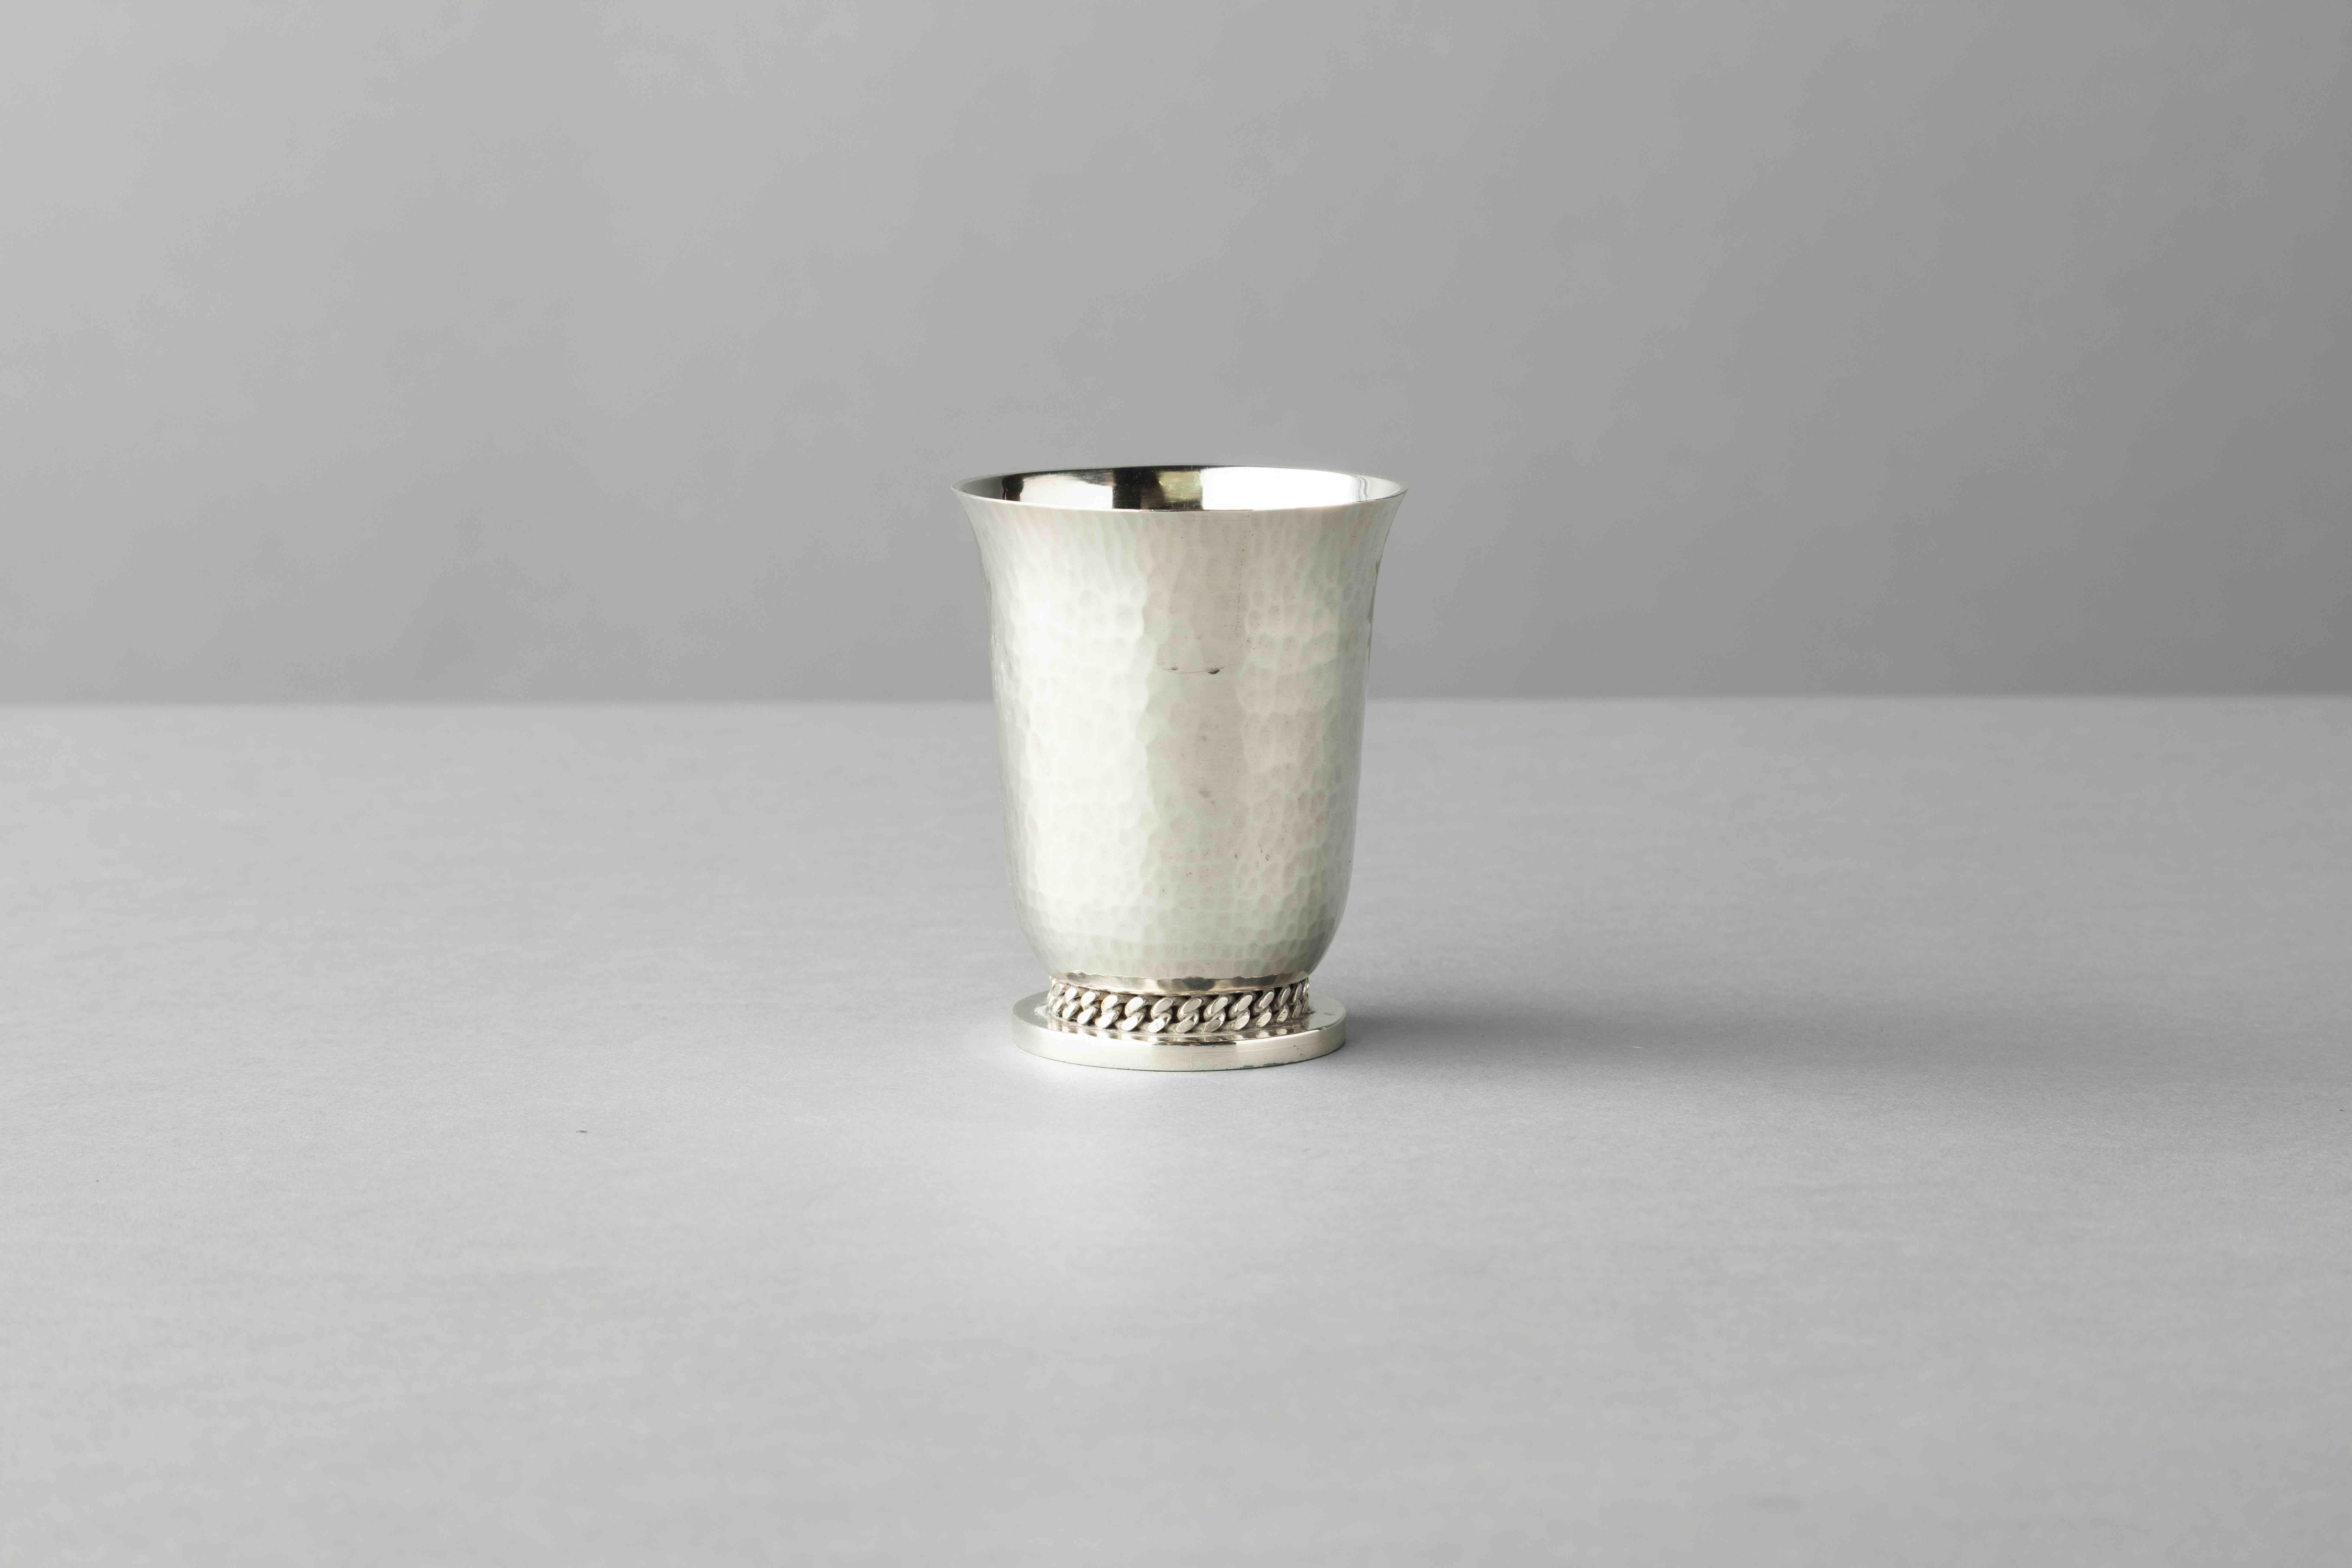 Heavy gauge silver plated cup with hammered finish with Despres’
Signature chain motif around base.